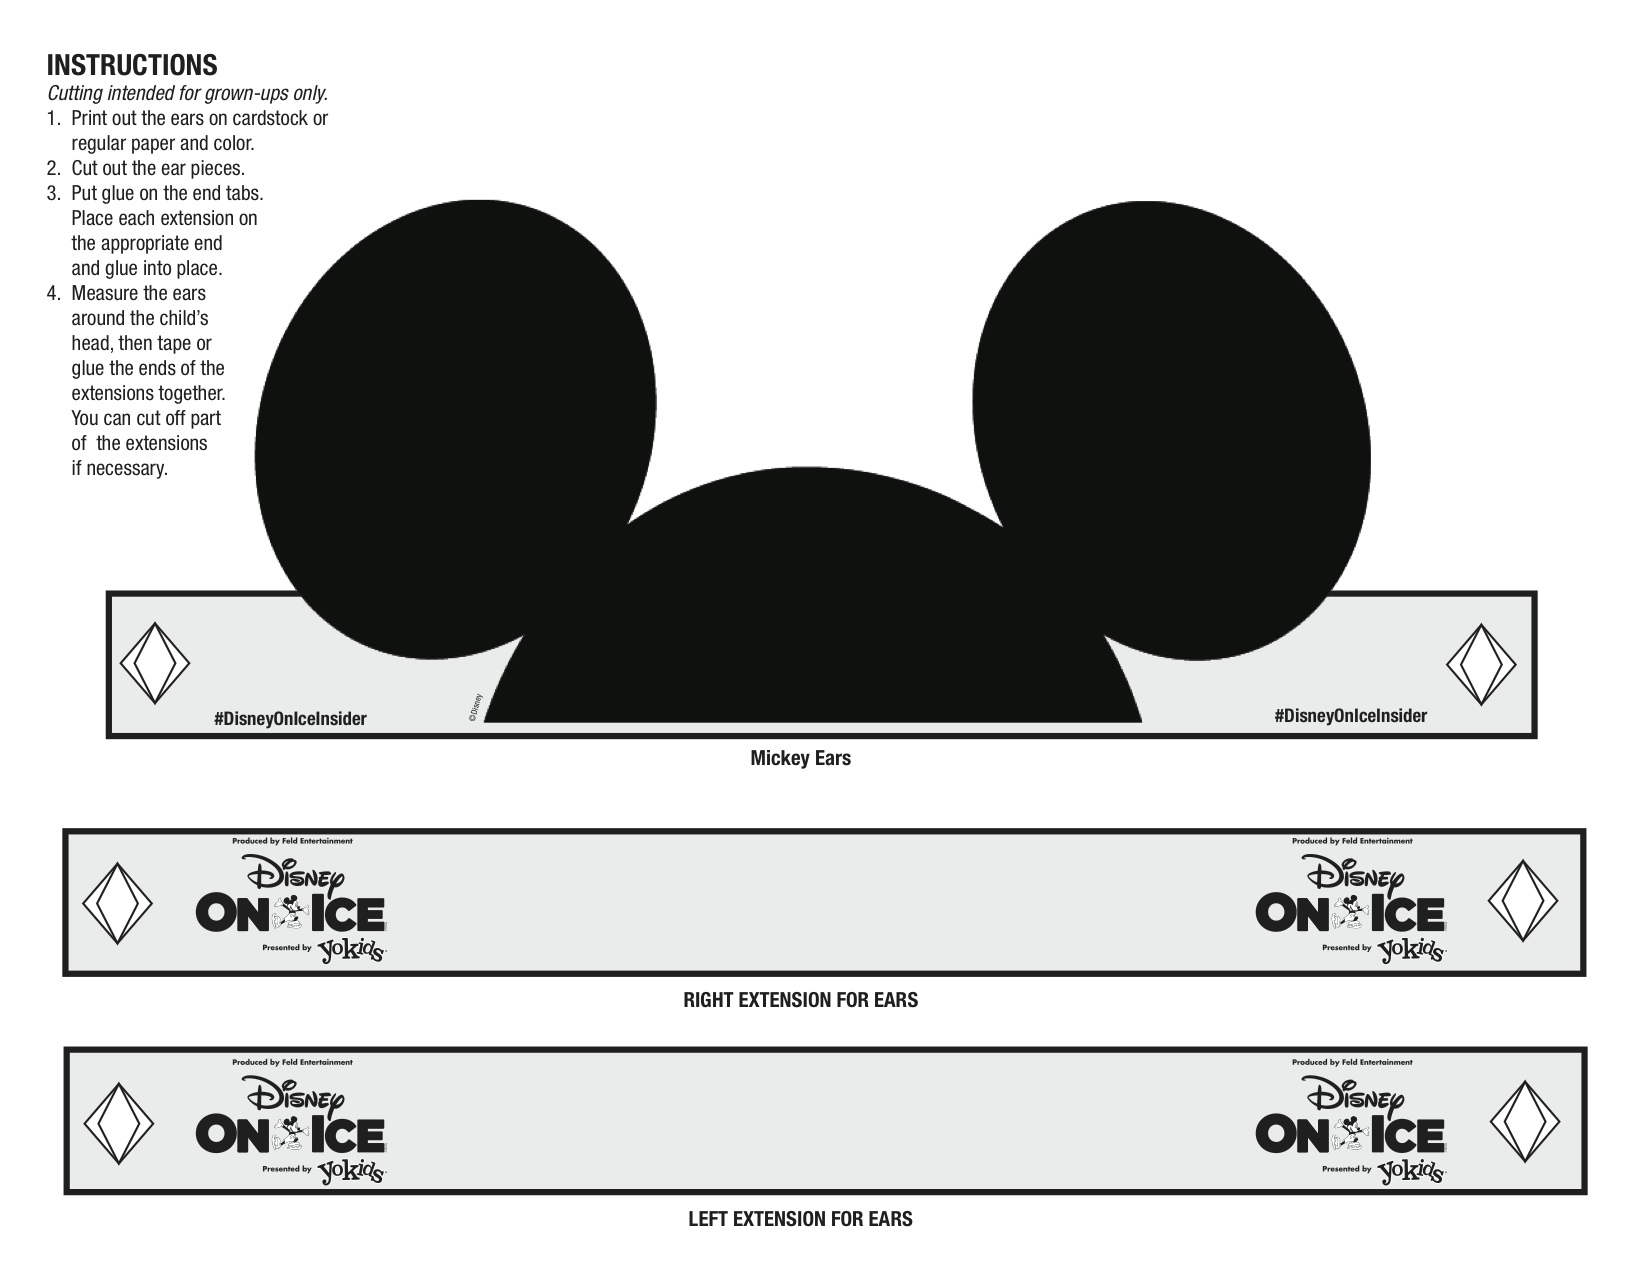 Mickey Mouse classic fun printable for the little ones in your life. Make these before you go to Disney on Ice. 